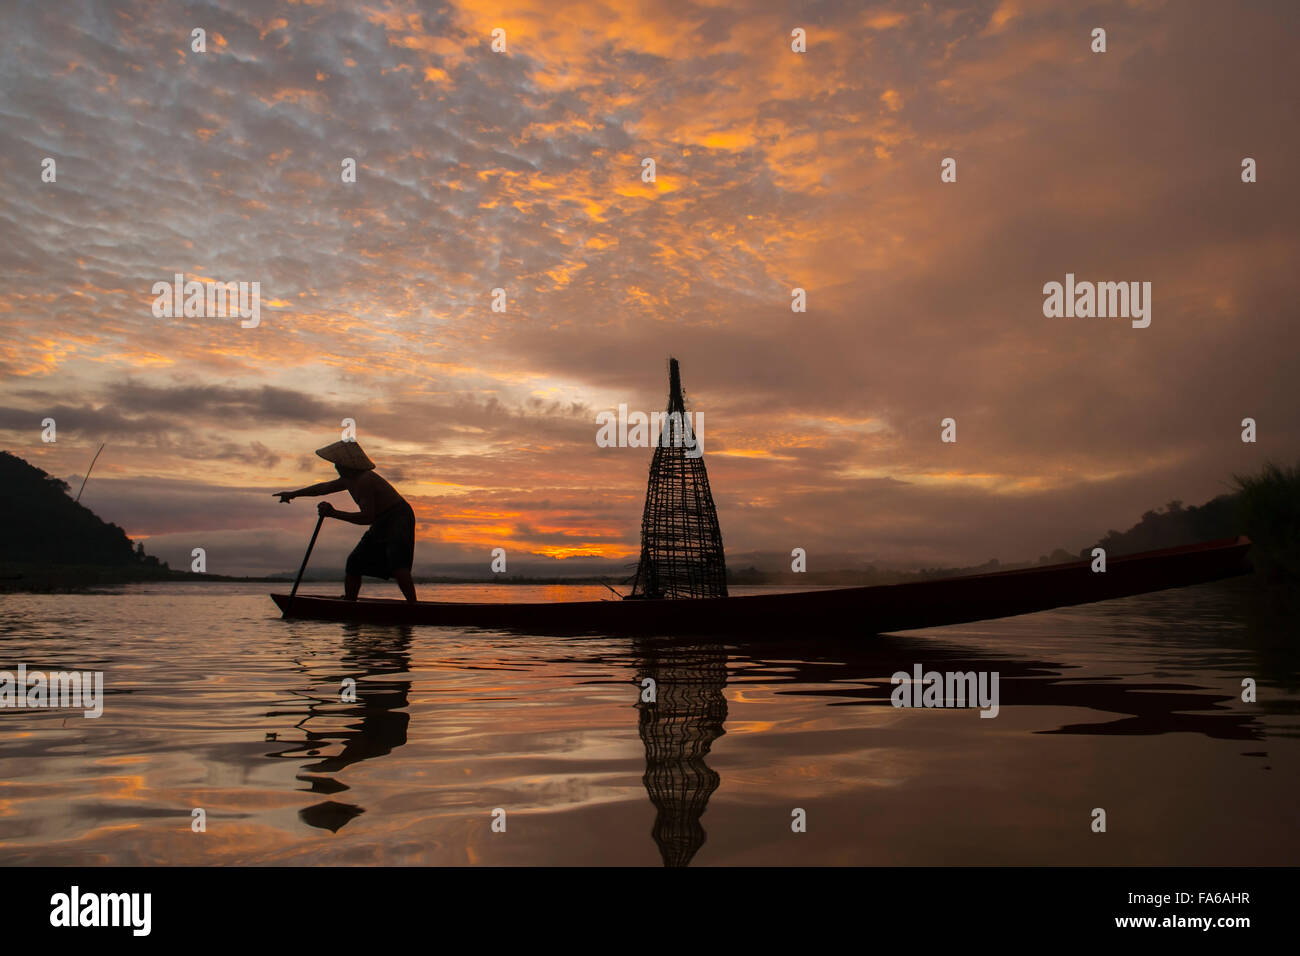 Silhouette of a man fishing in lake, Thailand Stock Photo